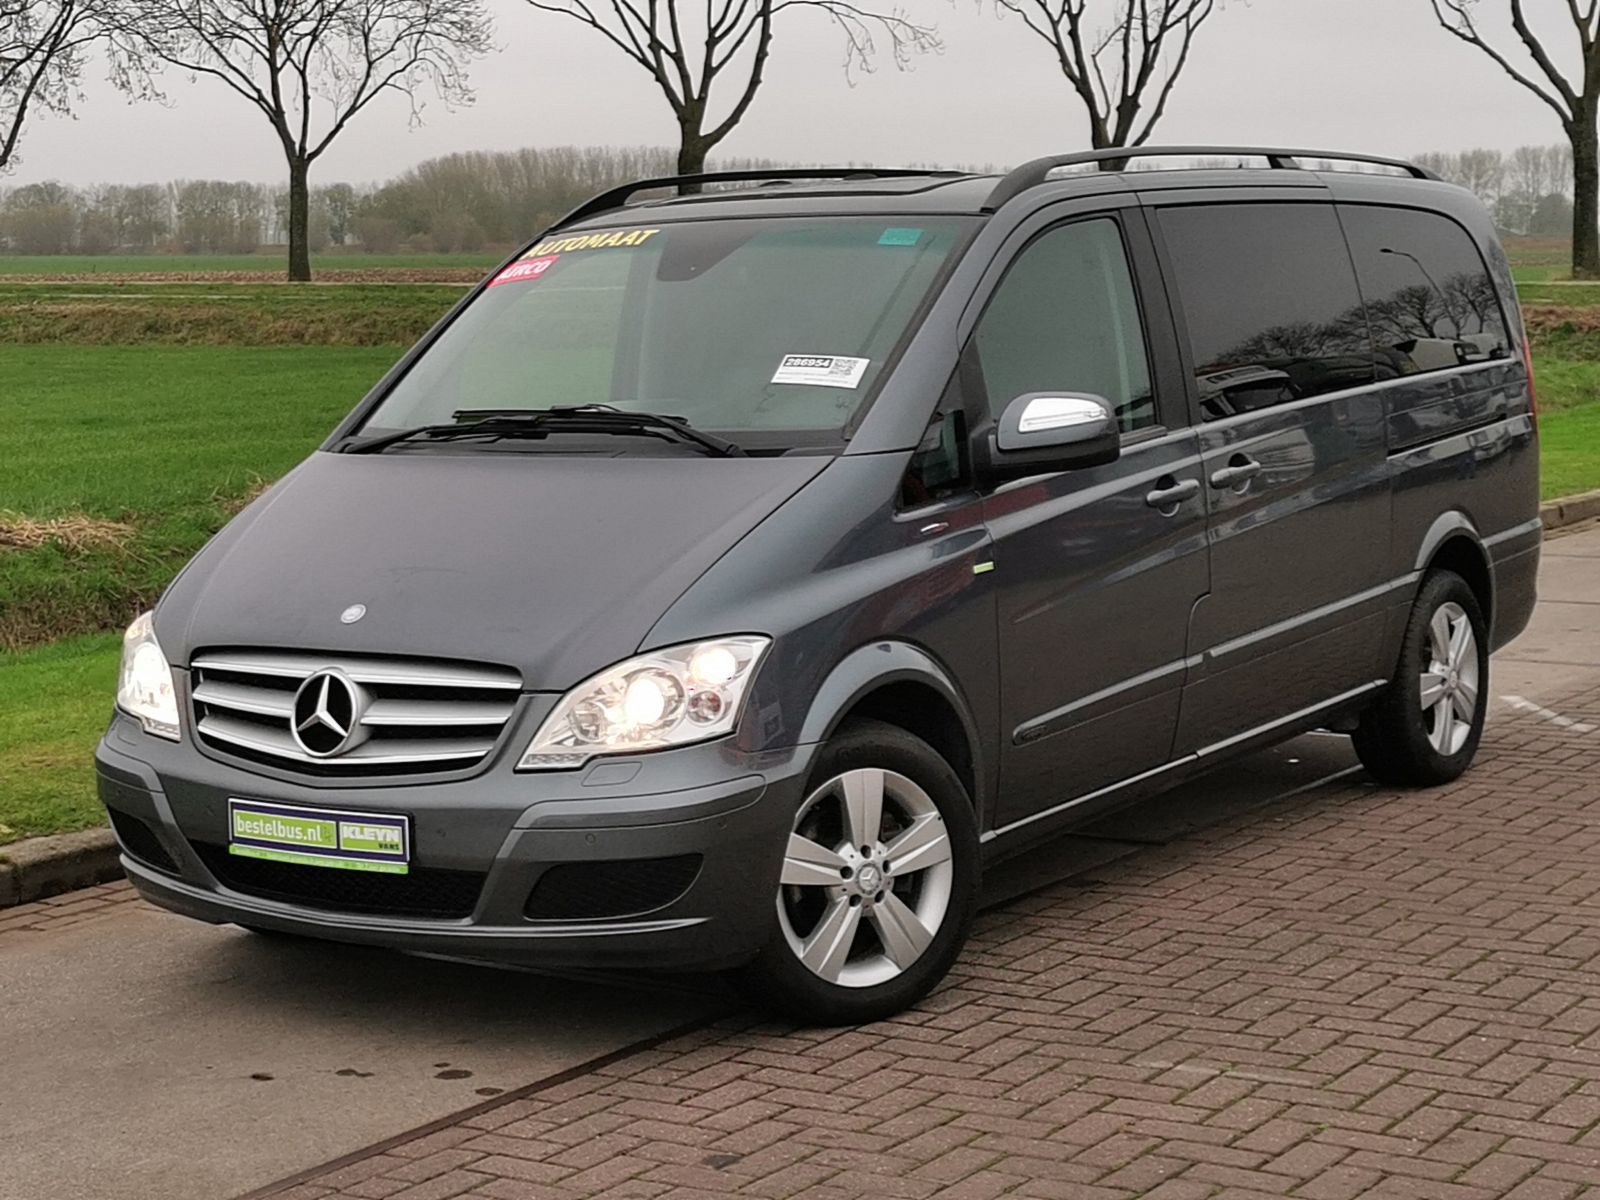 Mercedes Viano Type W639 2,0l CDI 80kW (109 hp) Wheels and Tyre Packages